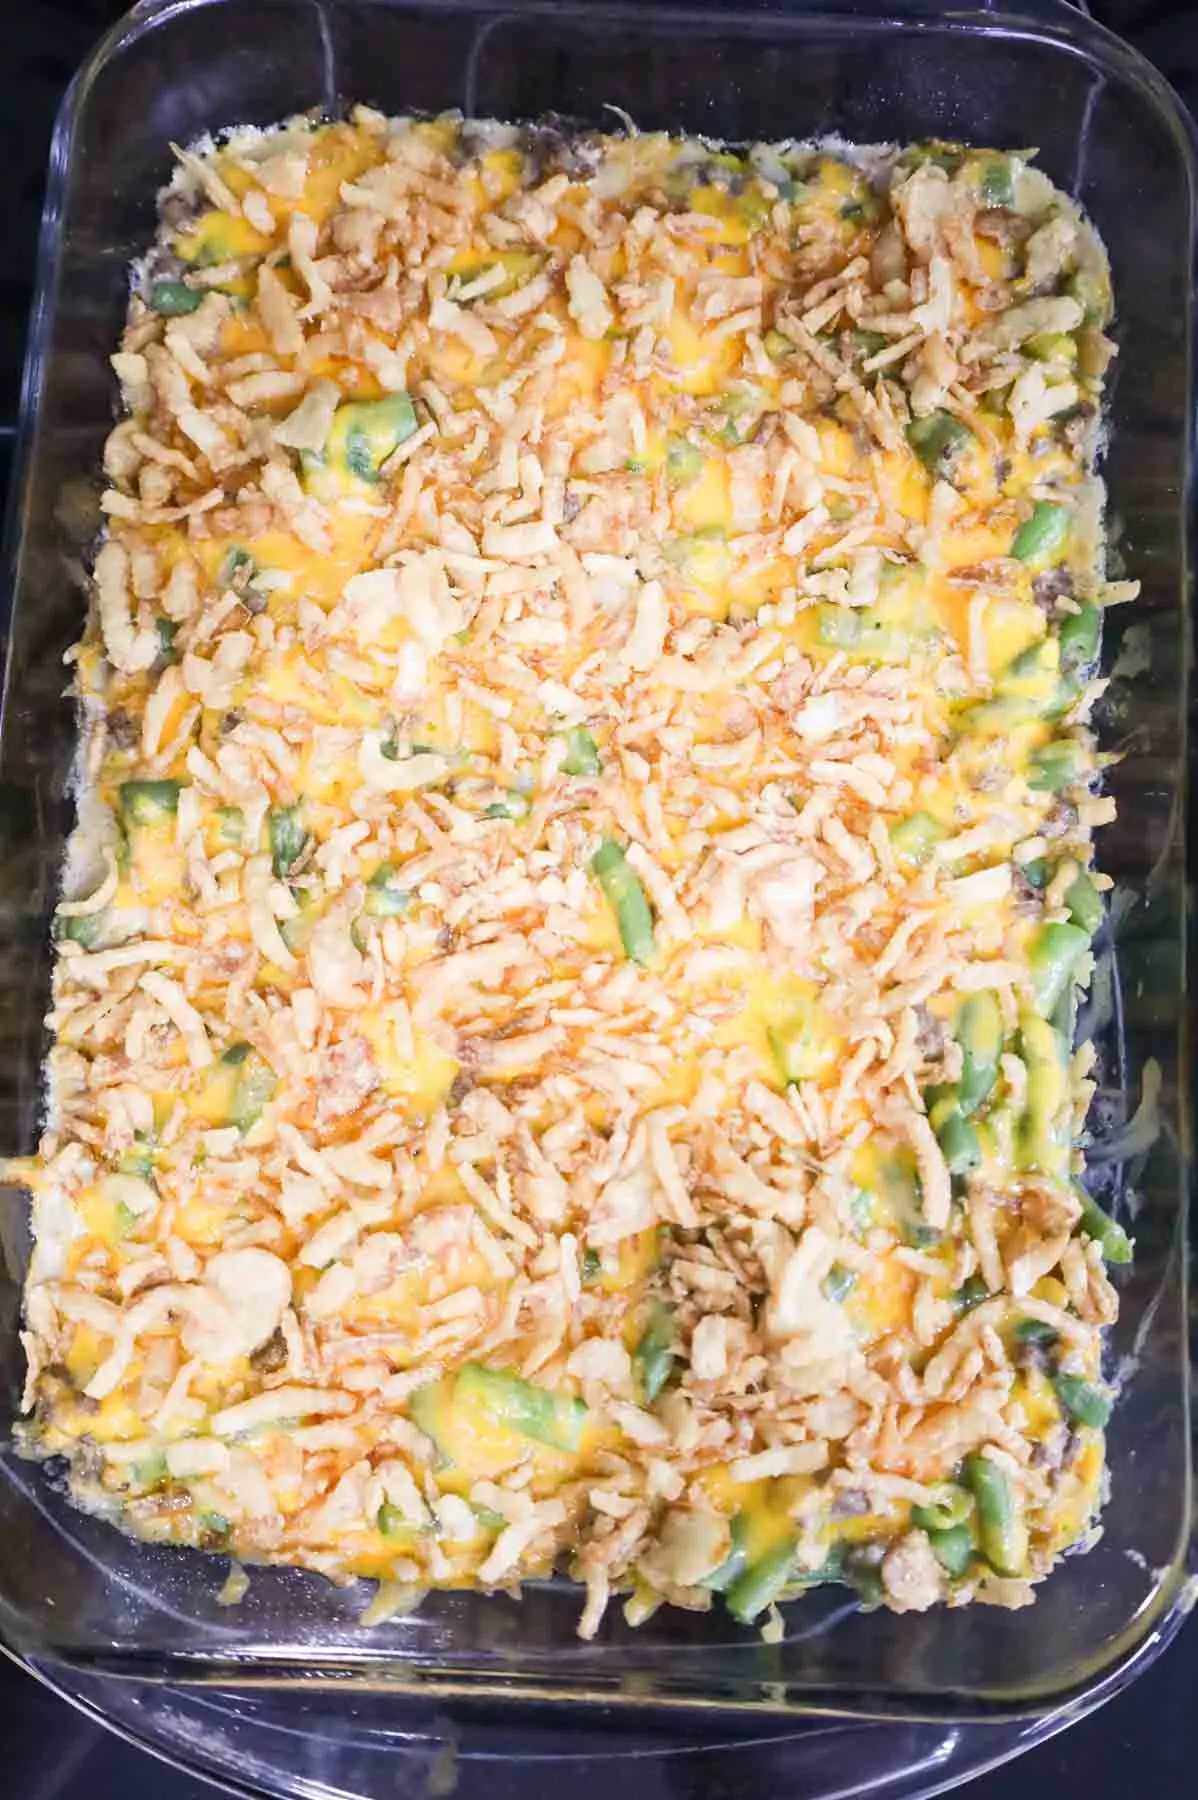 french's crispy fried onions sprinkled on top of cheesy green bean casserole